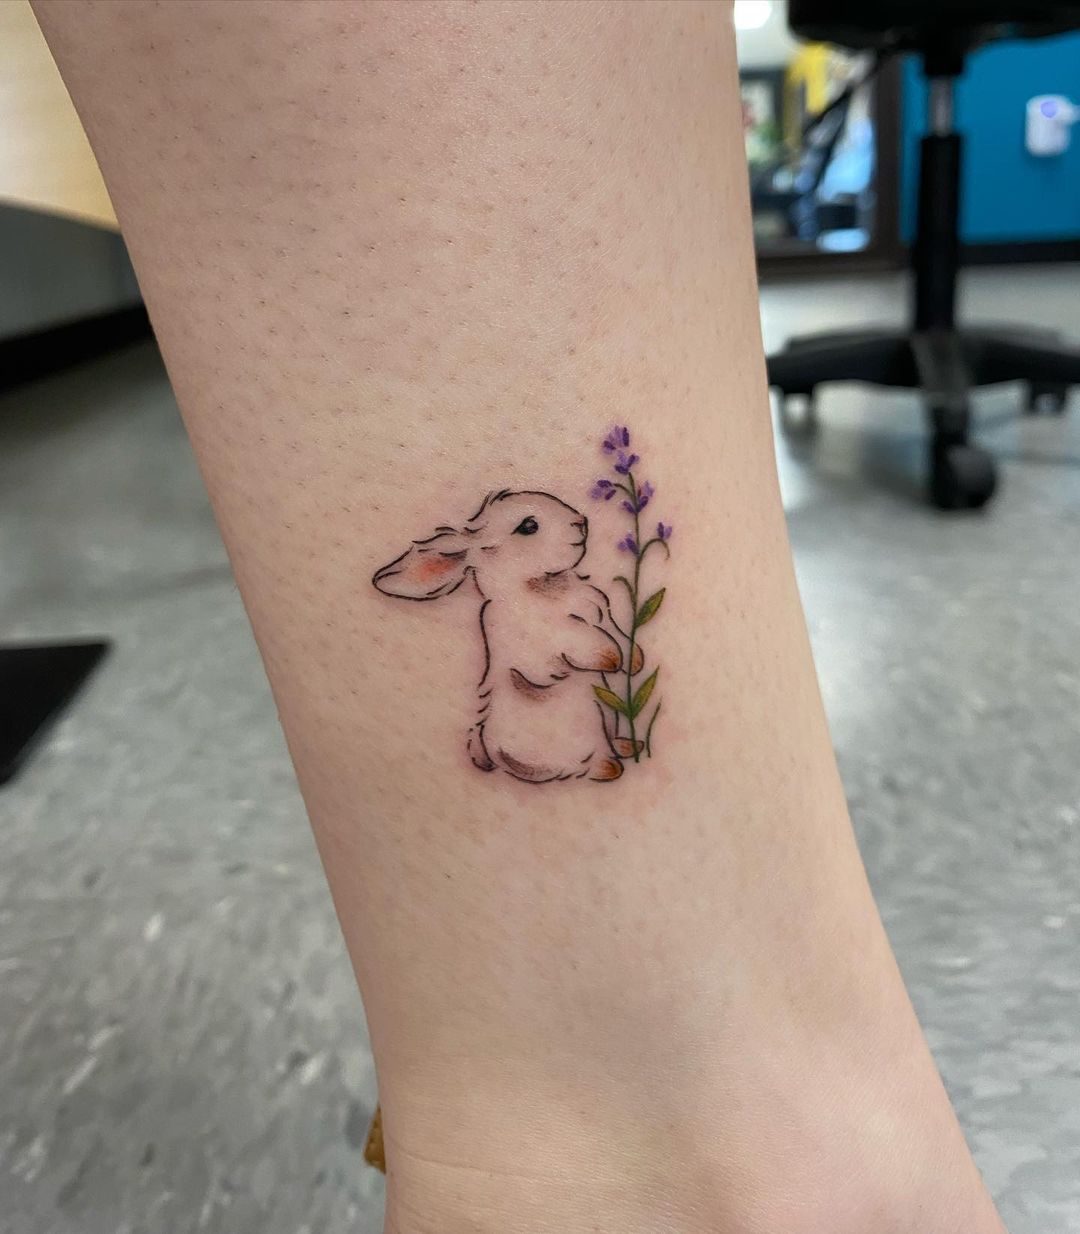 Bunny tattoo meaning 